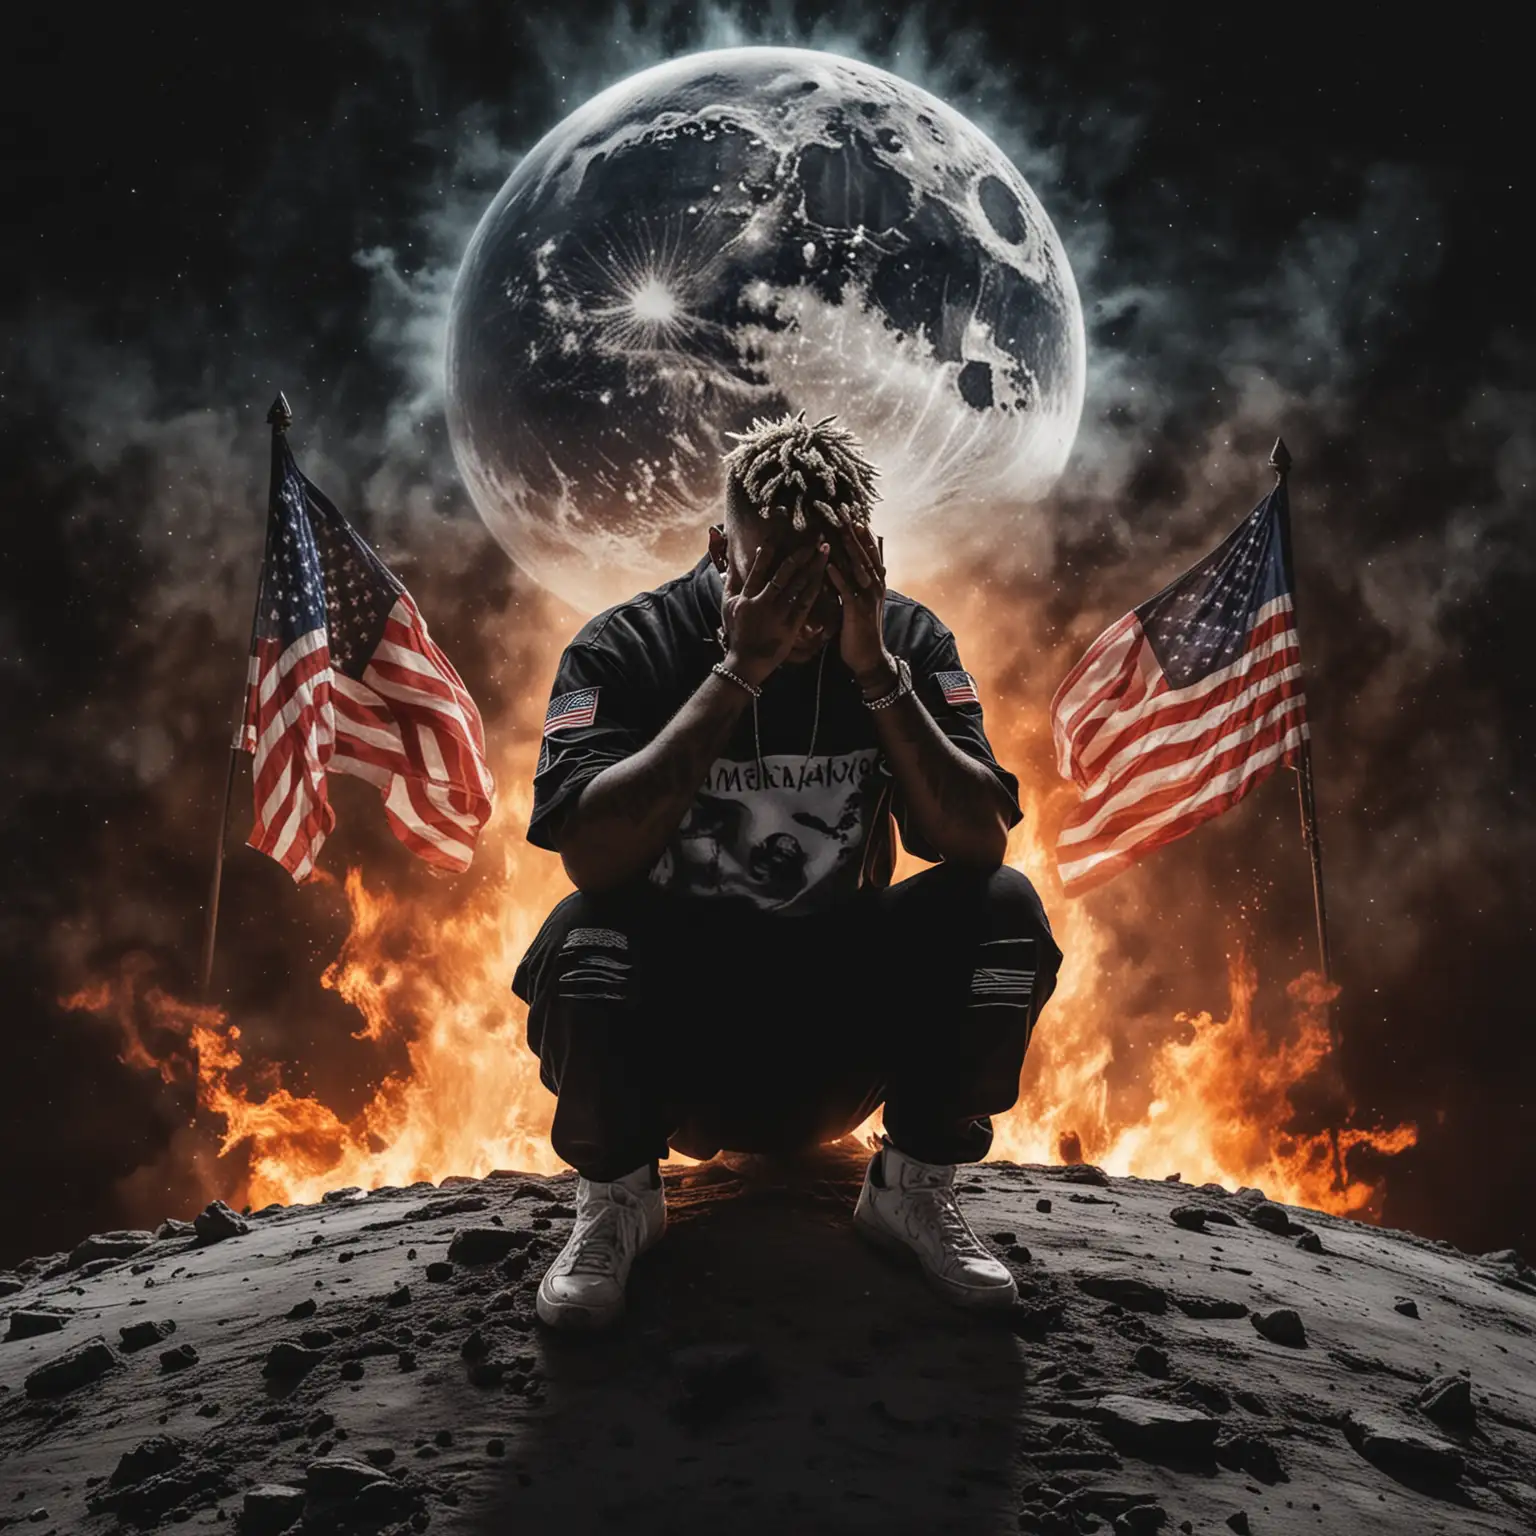 XXXTENTACION, SITTING ON THE MOON, COVERING HIS FACE WITH HIS HANDS, BEHIND HIM THE AMERICAN FLAG, BEHIND THE PLANET EARTH, WHICH IS BURNING